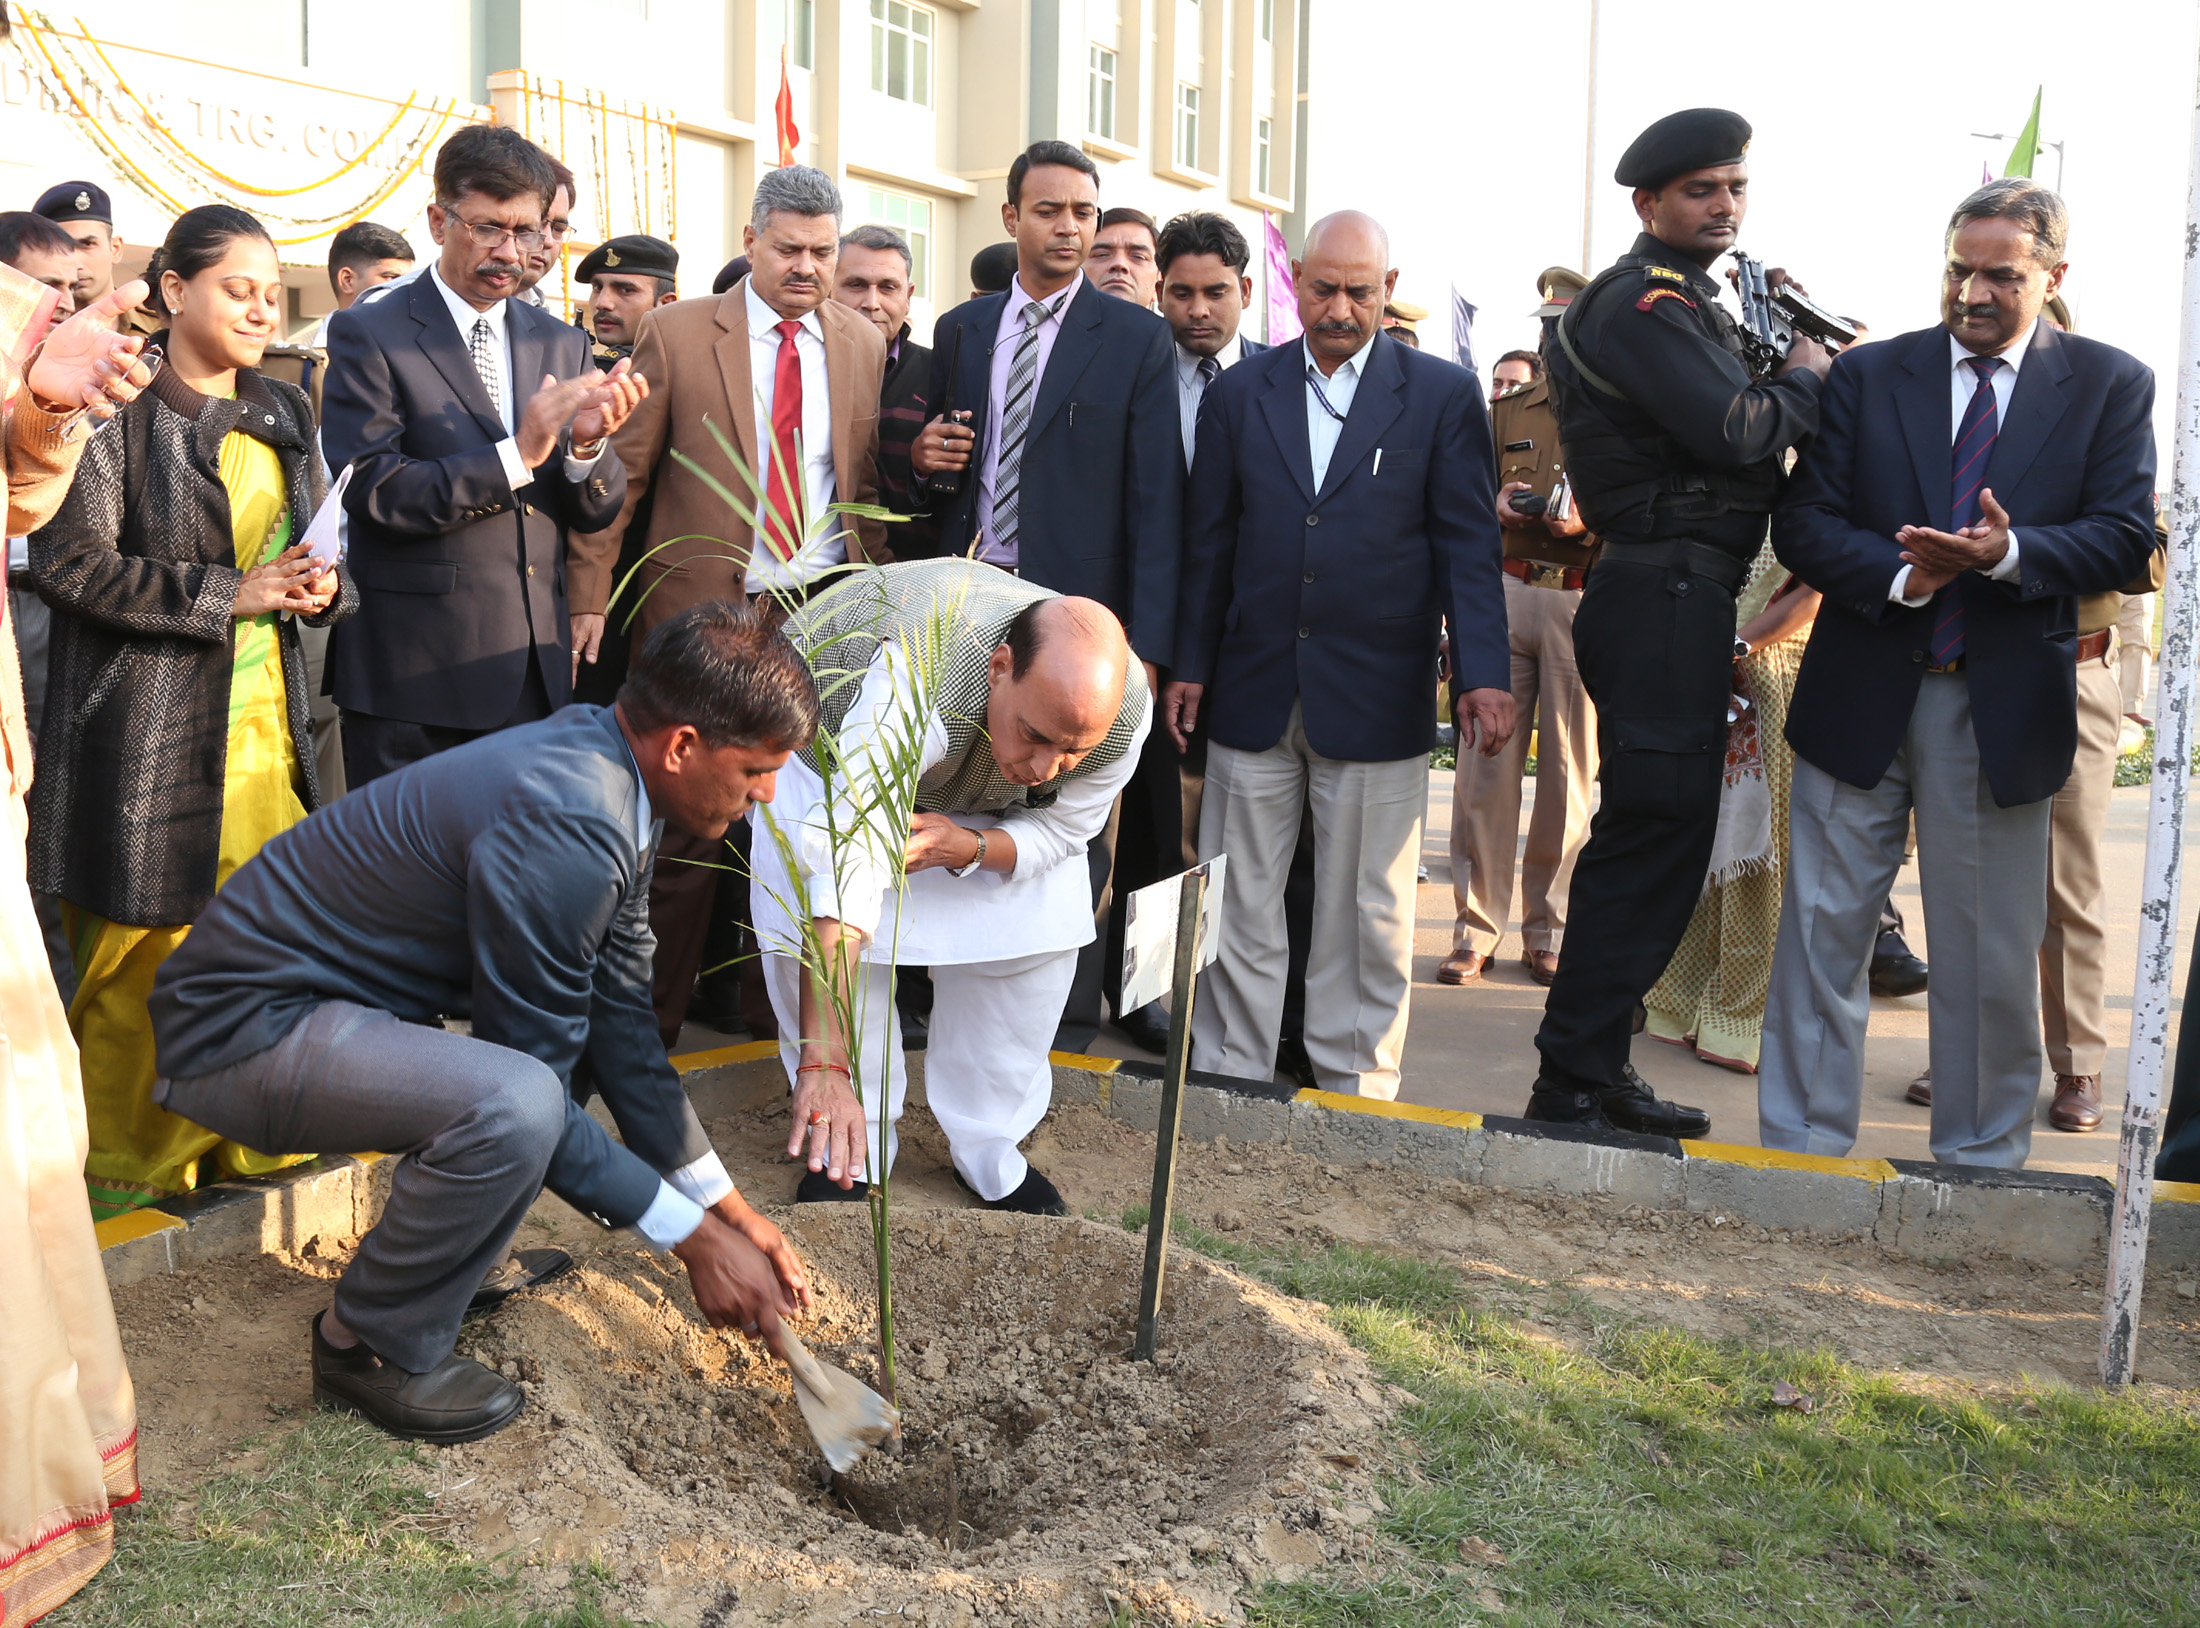 The Union Home Minister, Shri Rajnath Singh planting a sapling at the Central Detective Training School (CDTS) campus, in Ghaziabad on December 16, 2016.